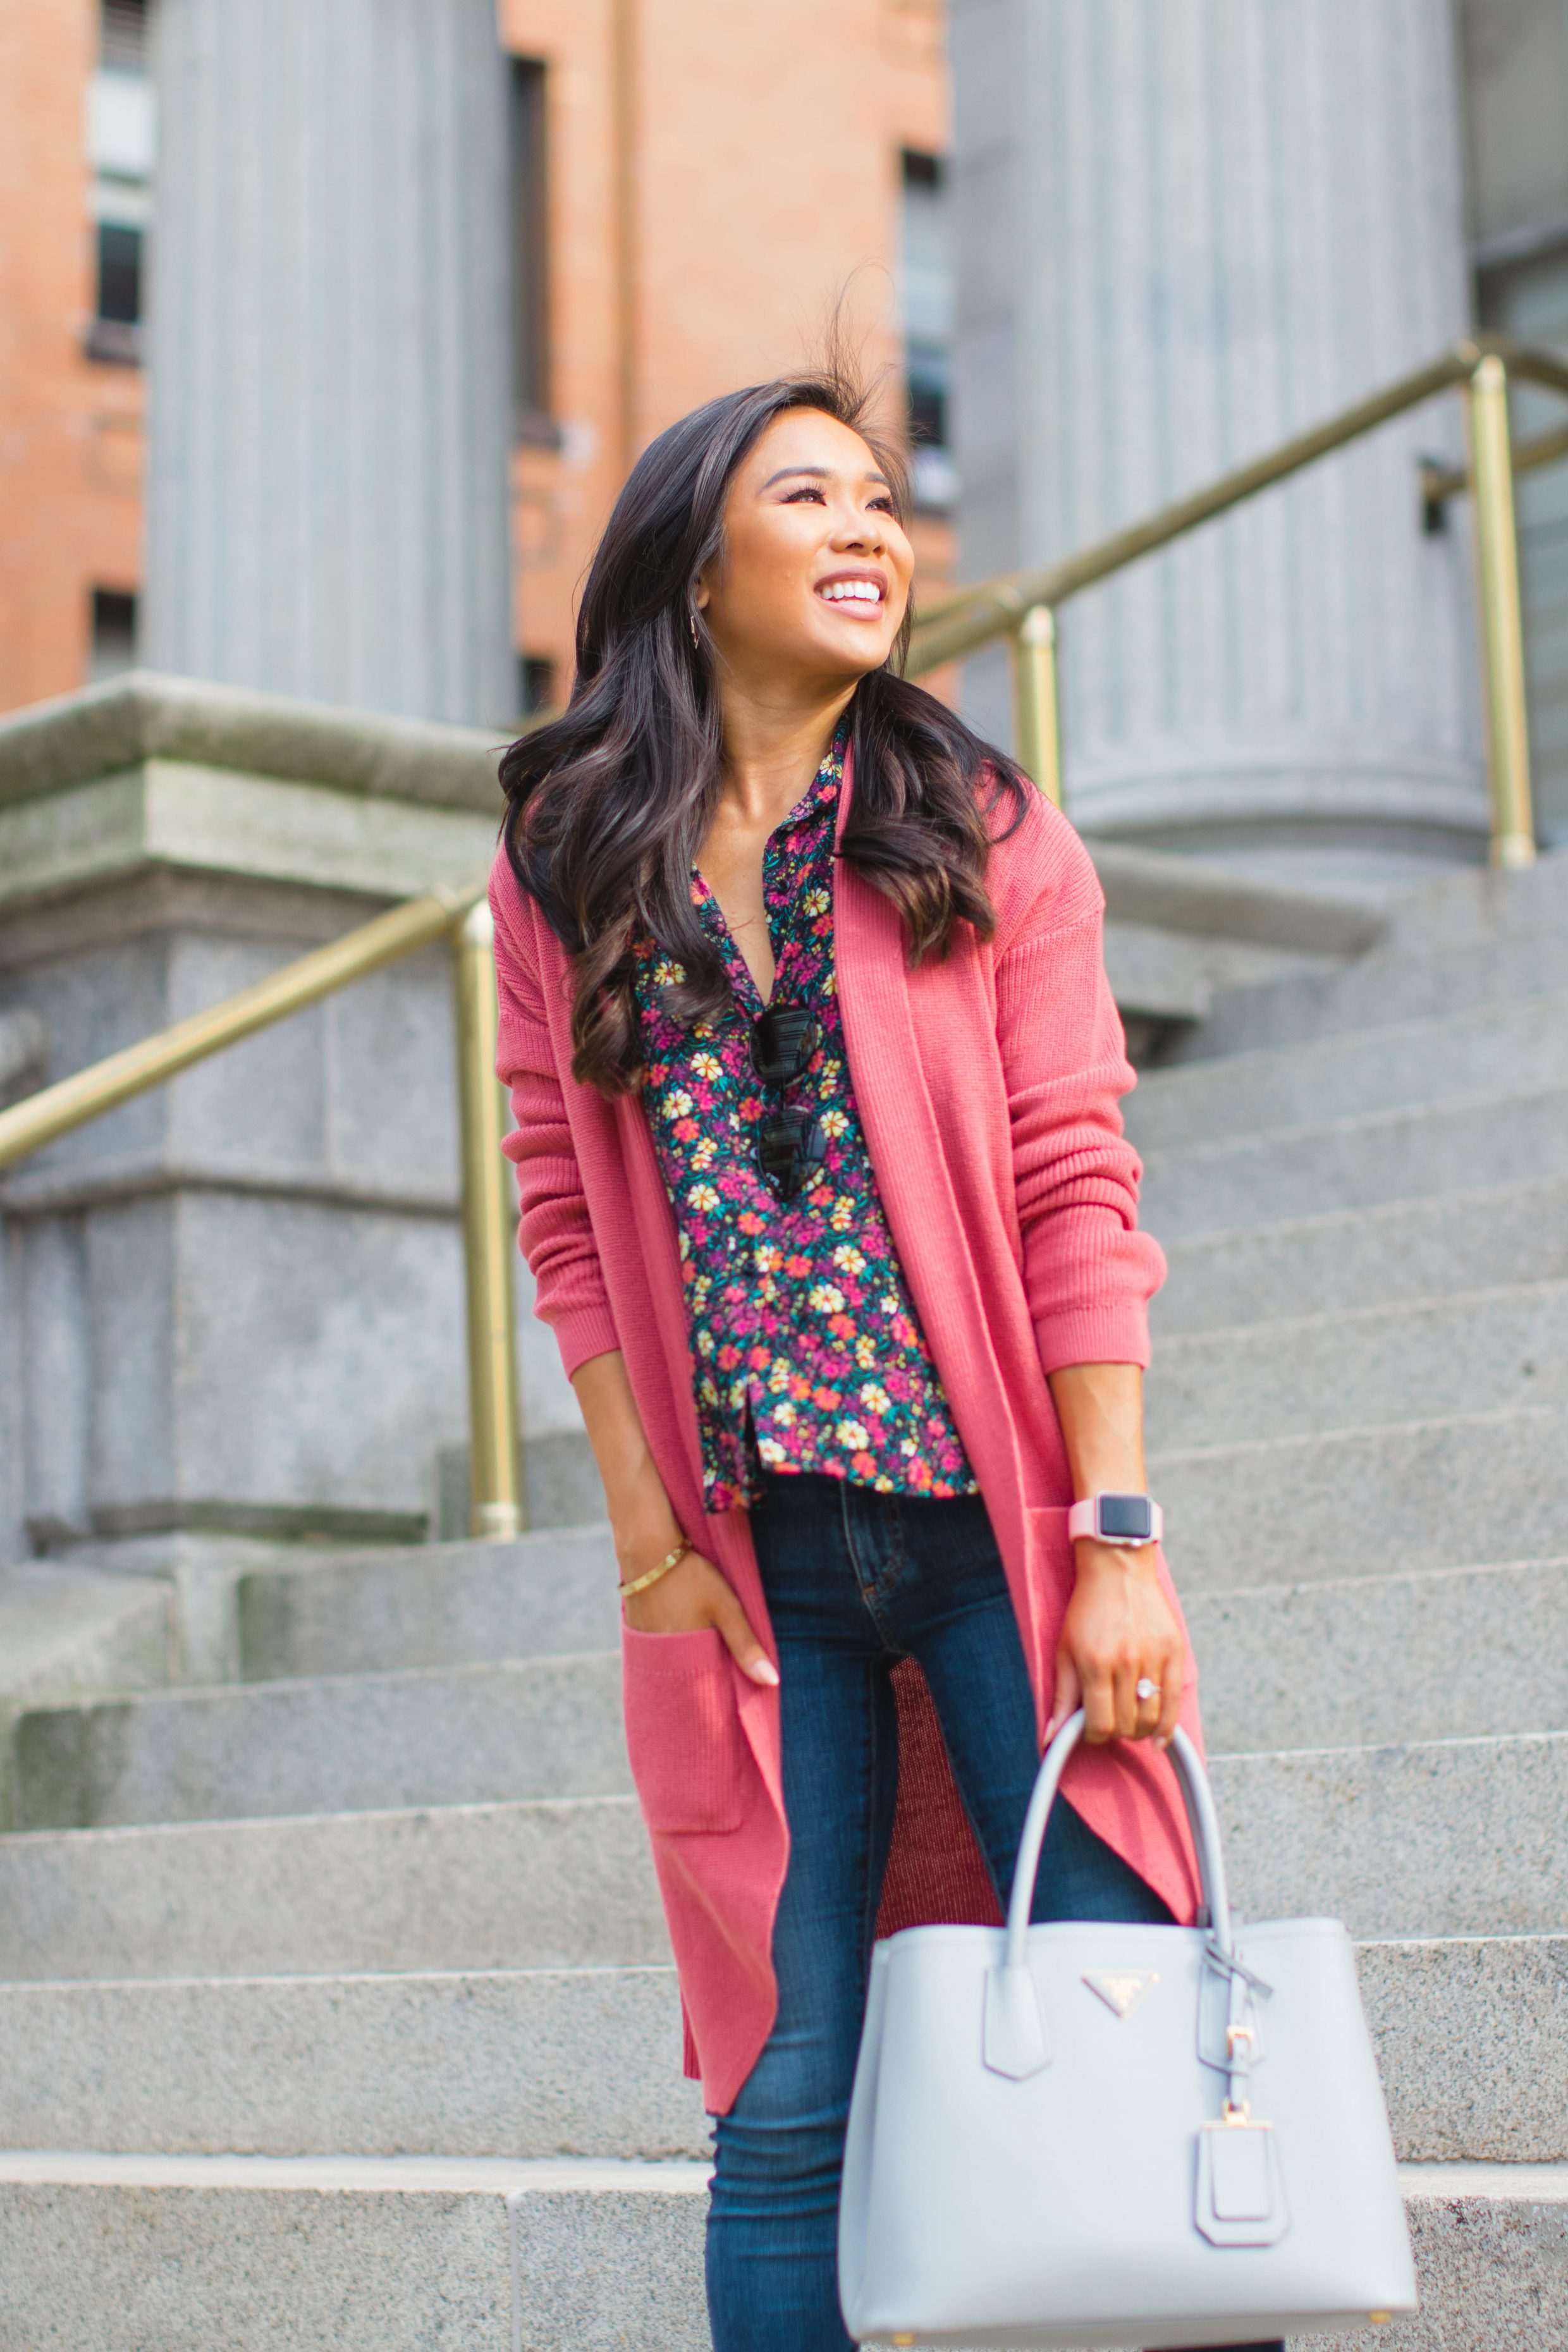 Norfolk fashion blogger Hoang-Kim wears a fall outfit idea with dark florals and booties